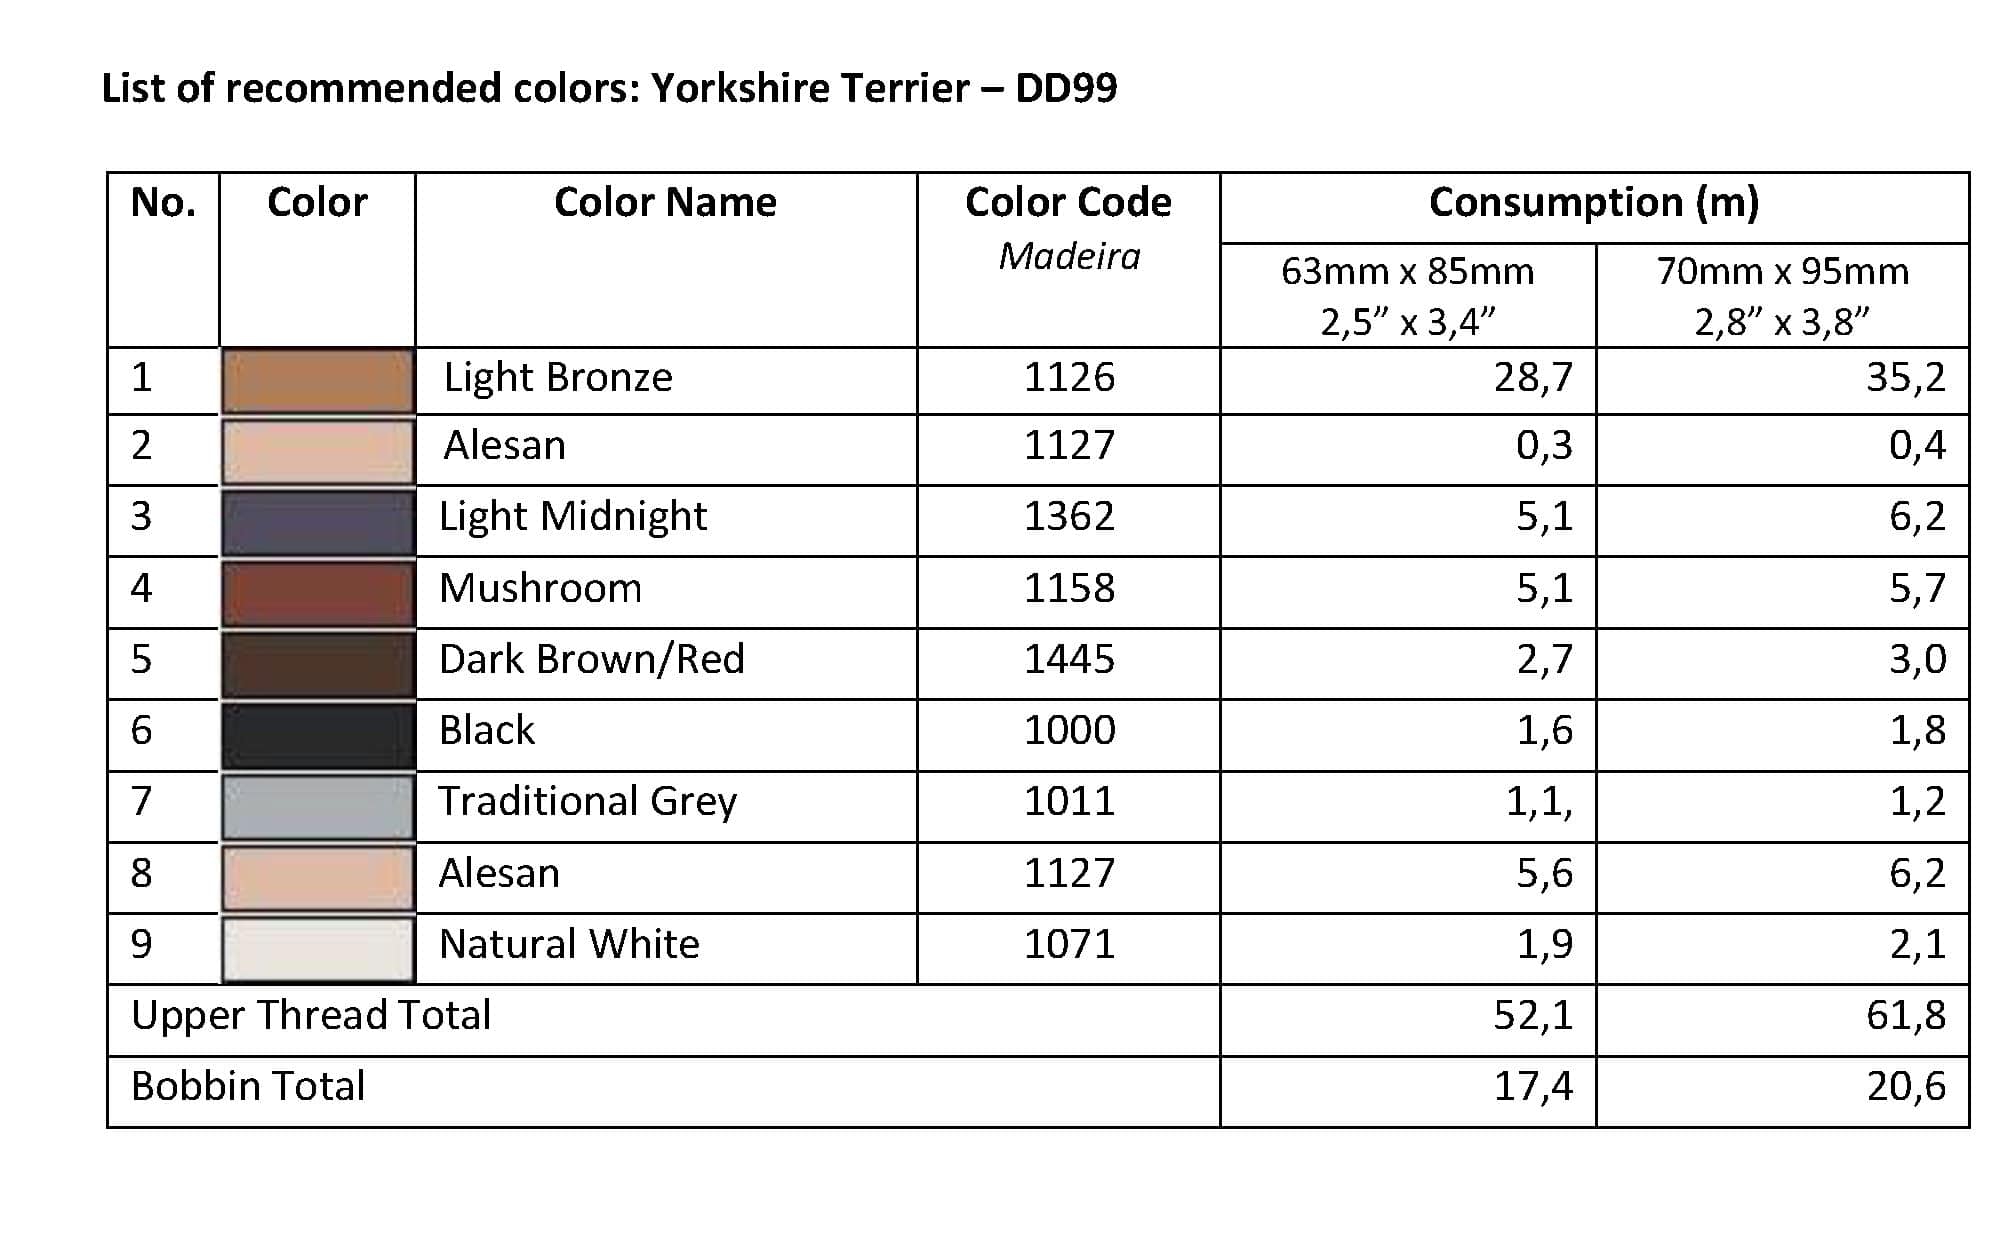 List of Recommended Colors -  Yorkshire Terrier DD99